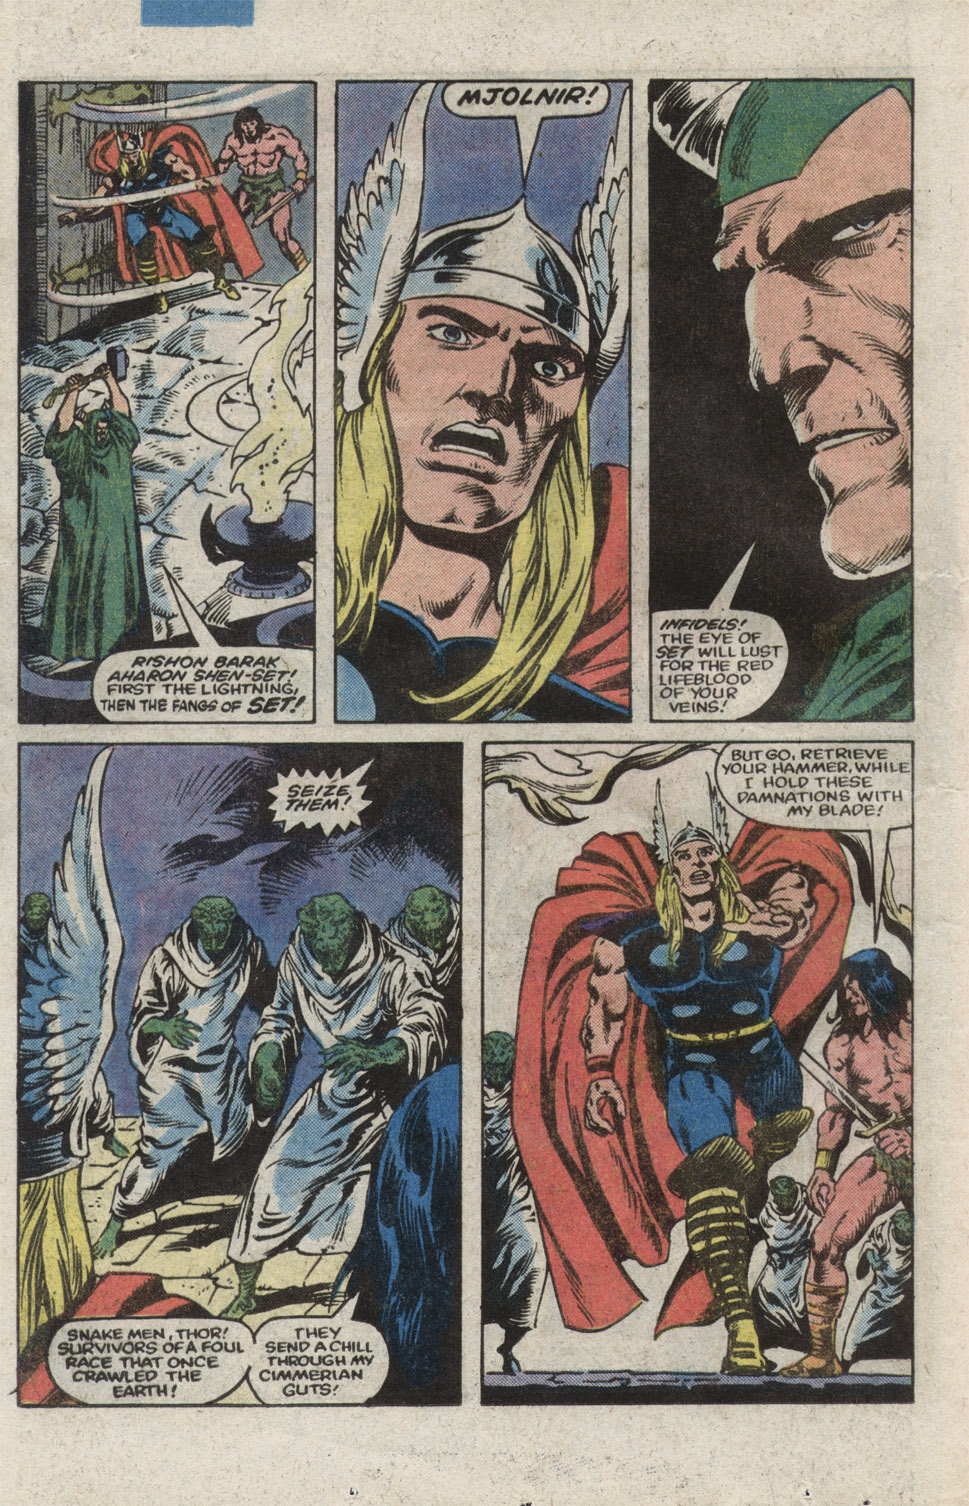 What If? (1977) issue 39 - Thor battled conan - Page 36